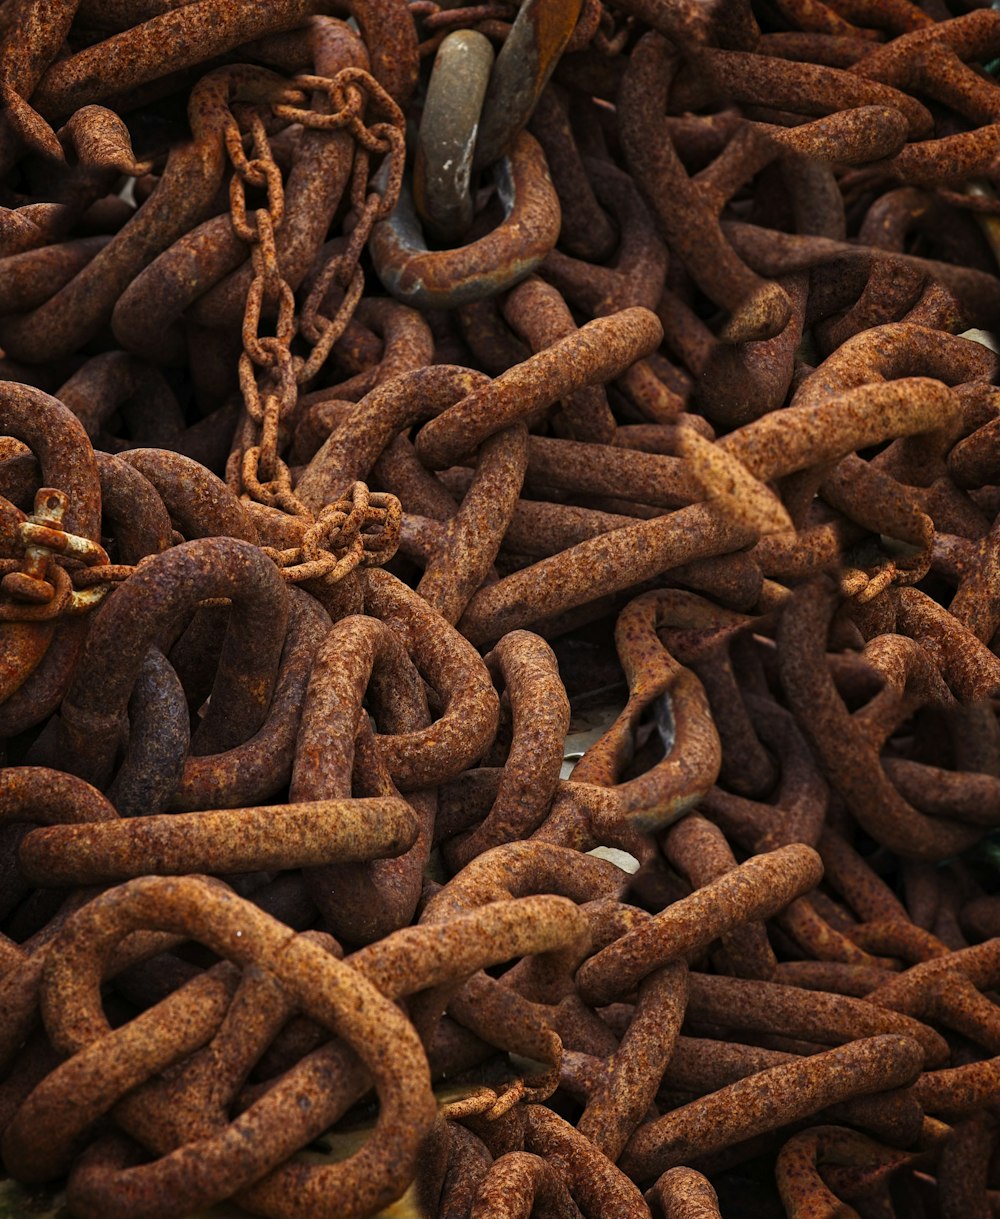 a pile of rusted metal chains and chains